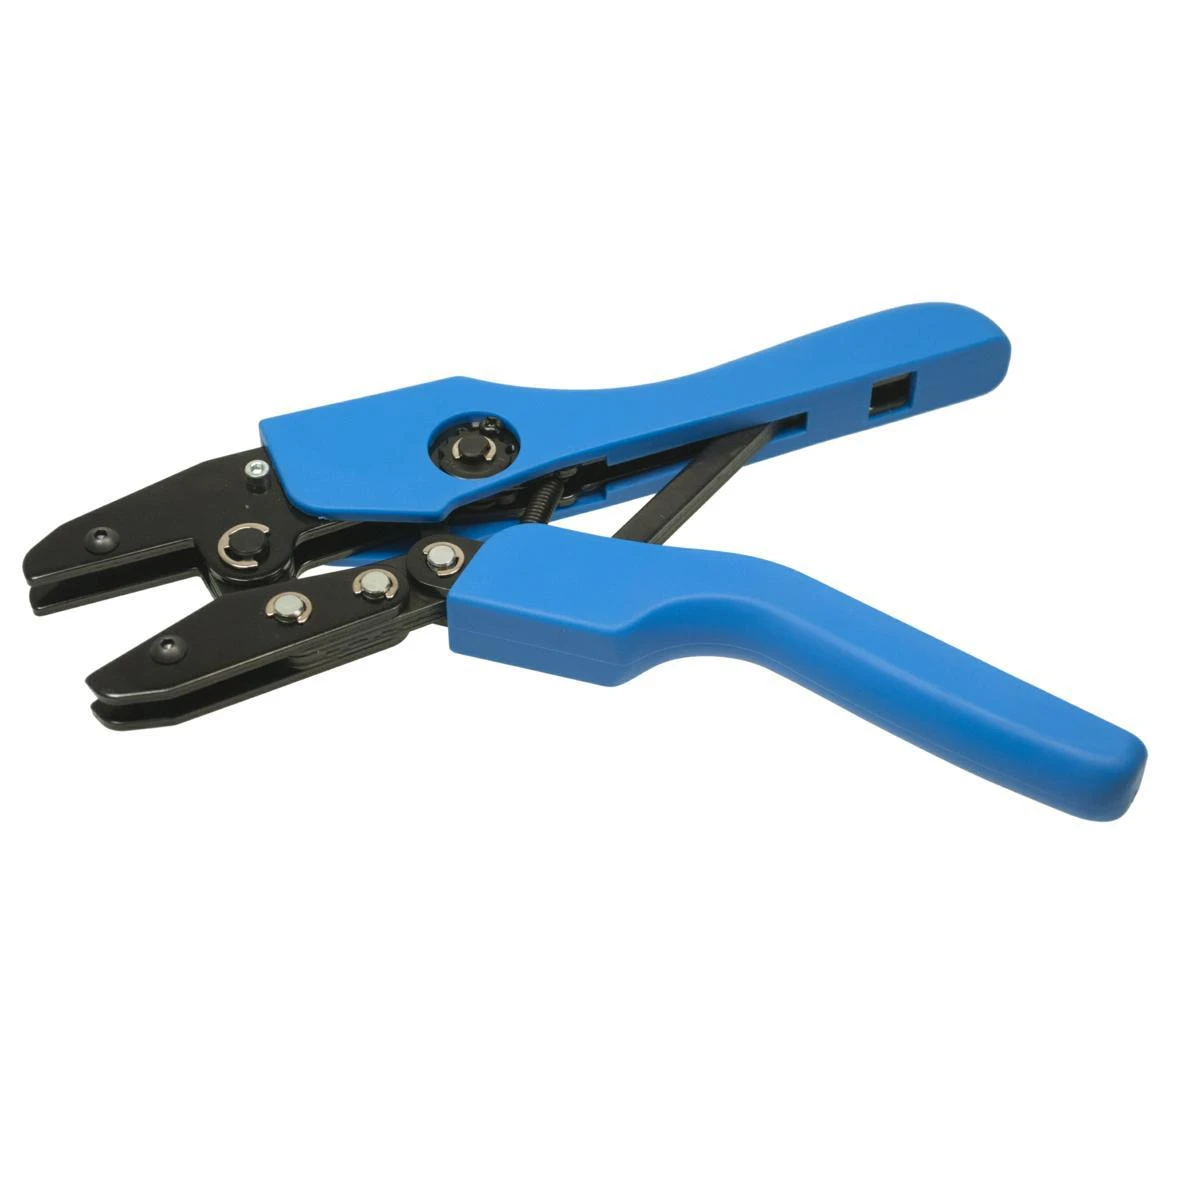 MULTIPORPOSE PLIERS WITH DIES FOR ATTACHING BOTTOM STOPS